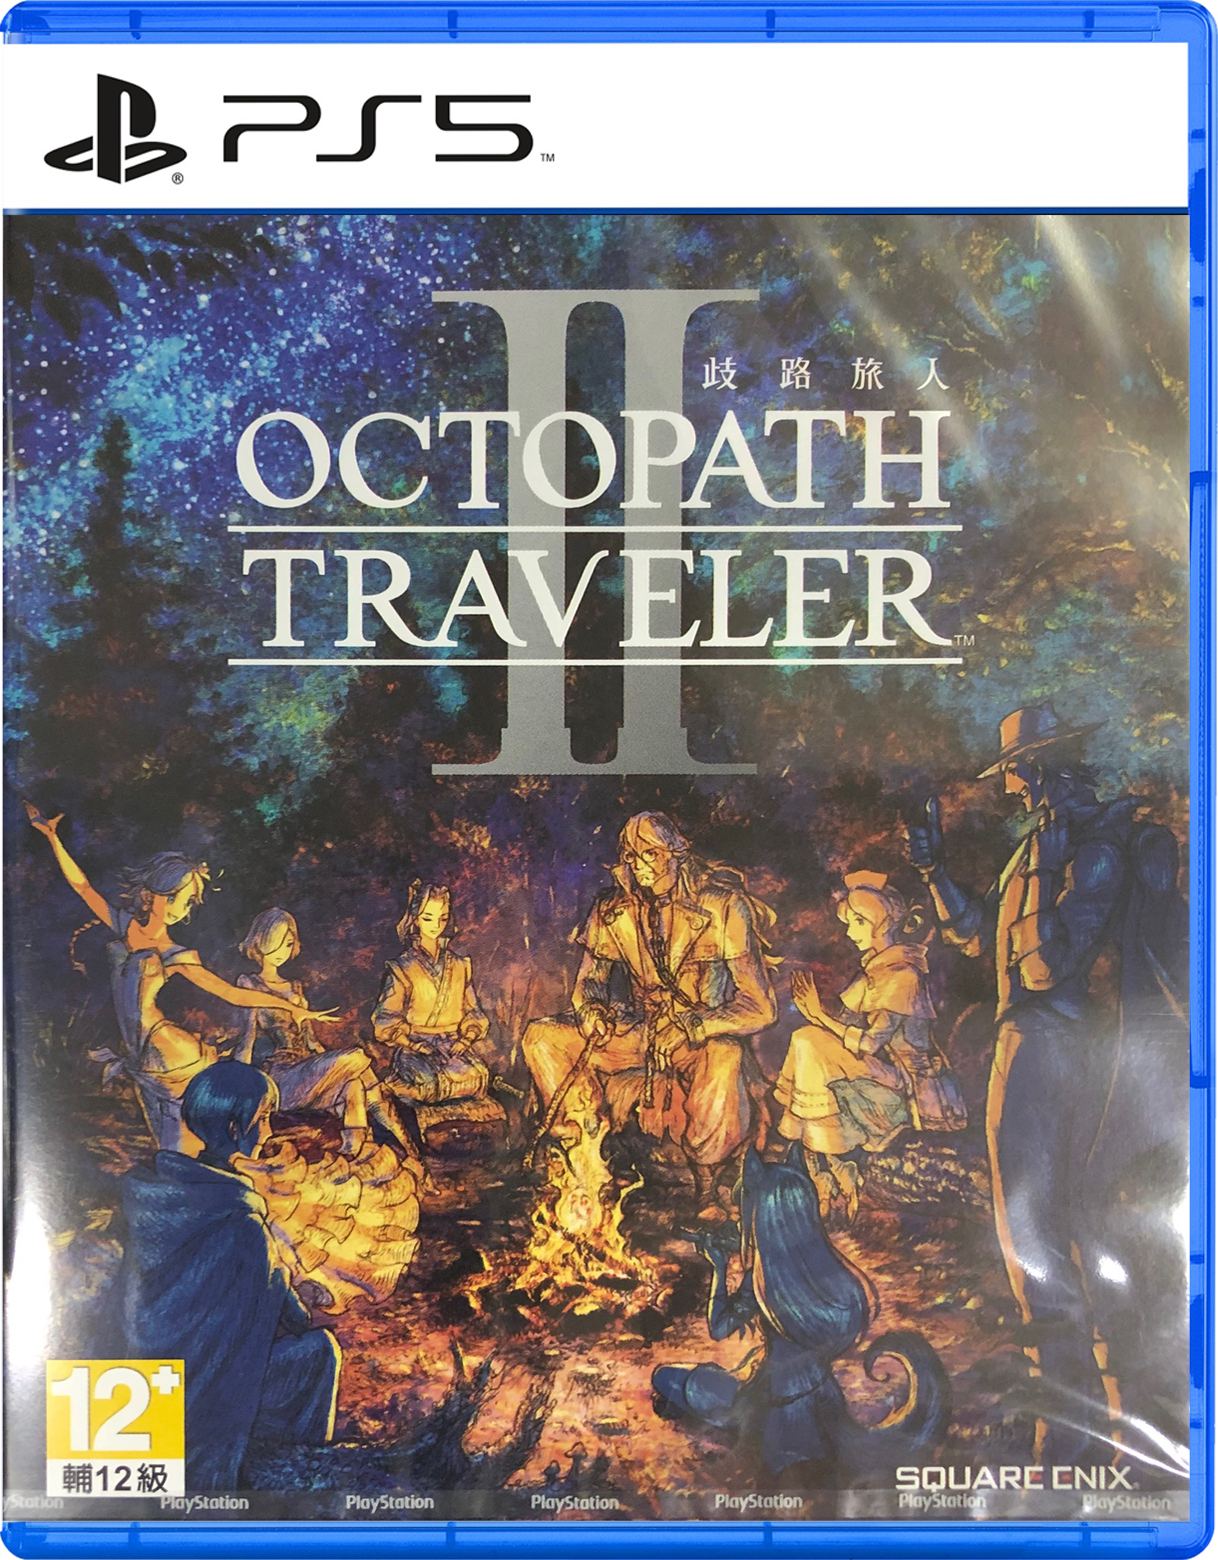 OCTOPATH TRAVELER™  Download and Buy Today - Epic Games Store